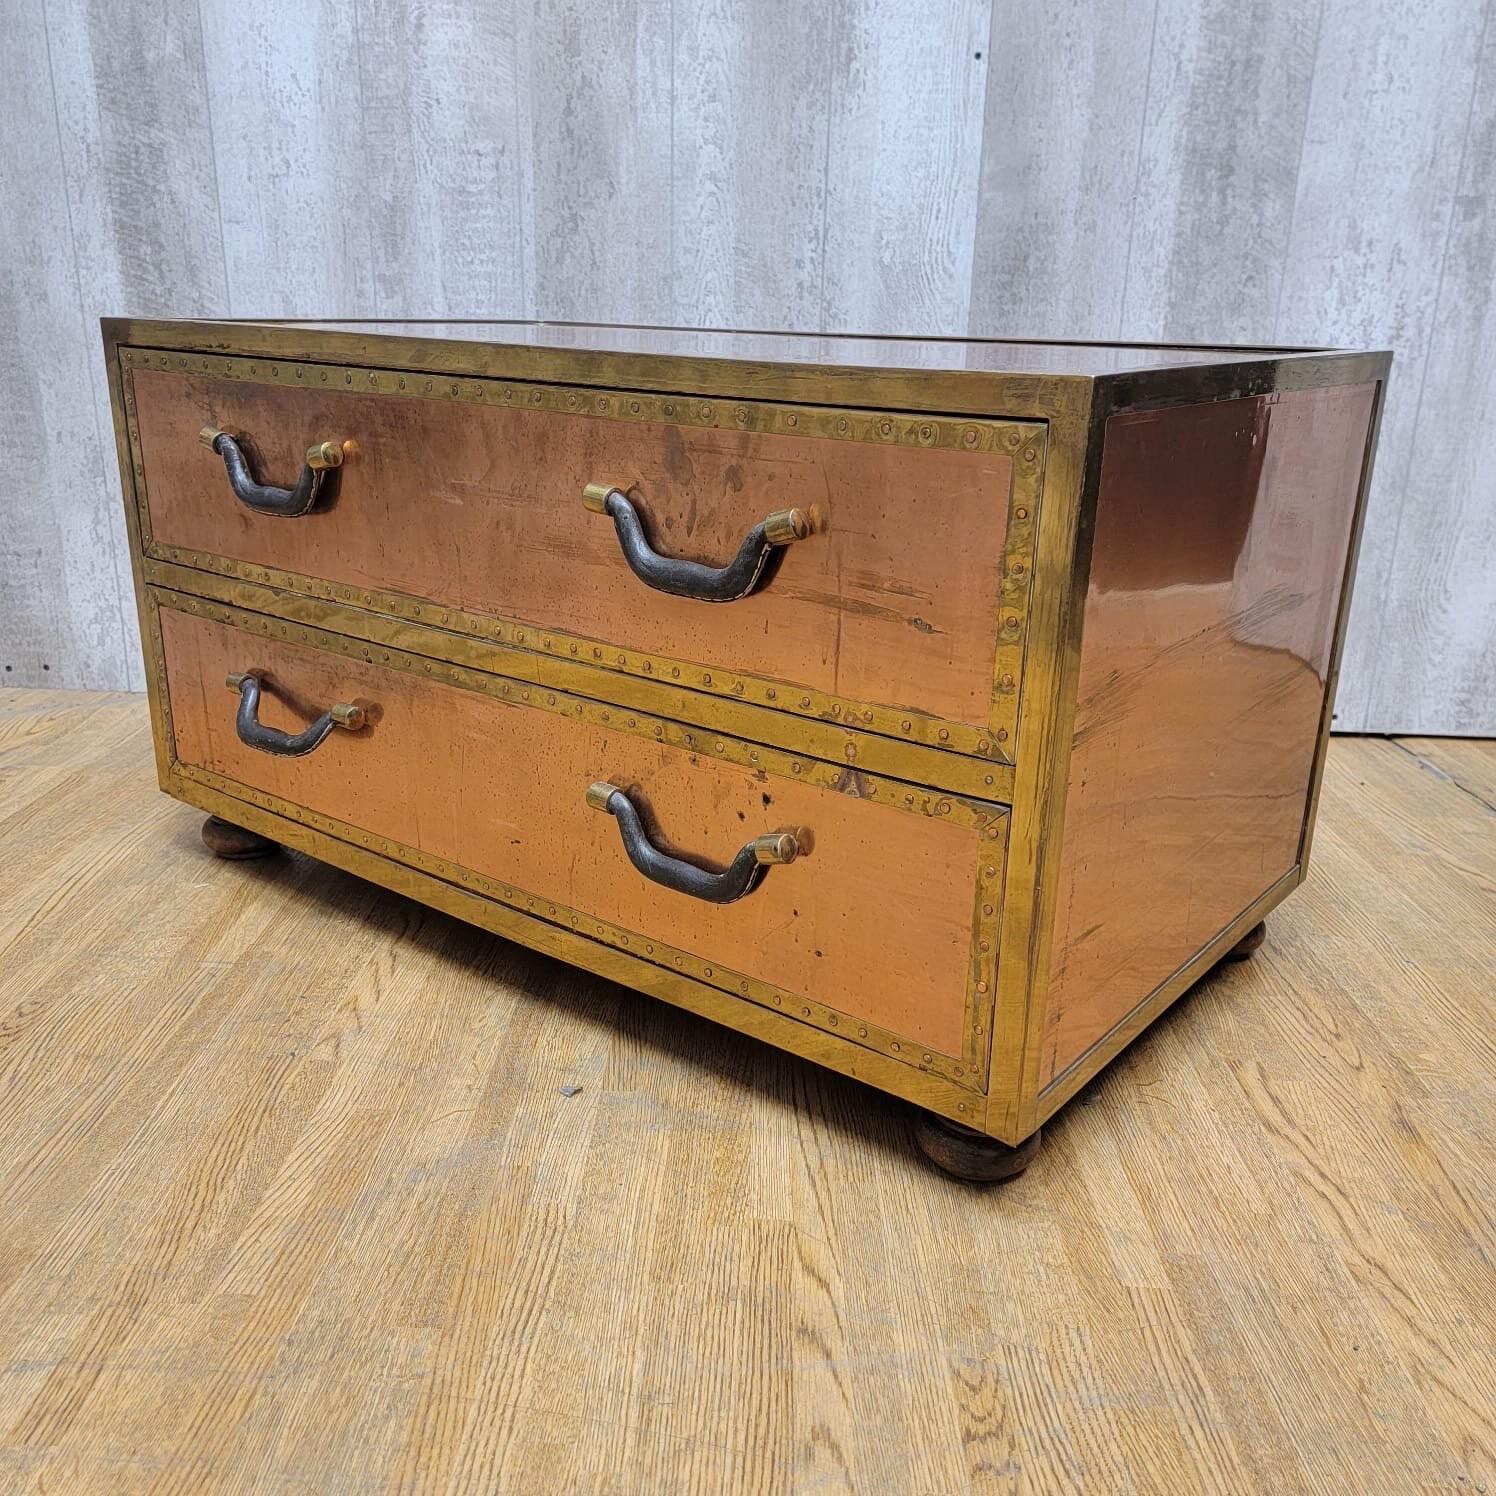 Hand-Crafted Vintage Copper Trunk Style Coffee Table with Leather Handles